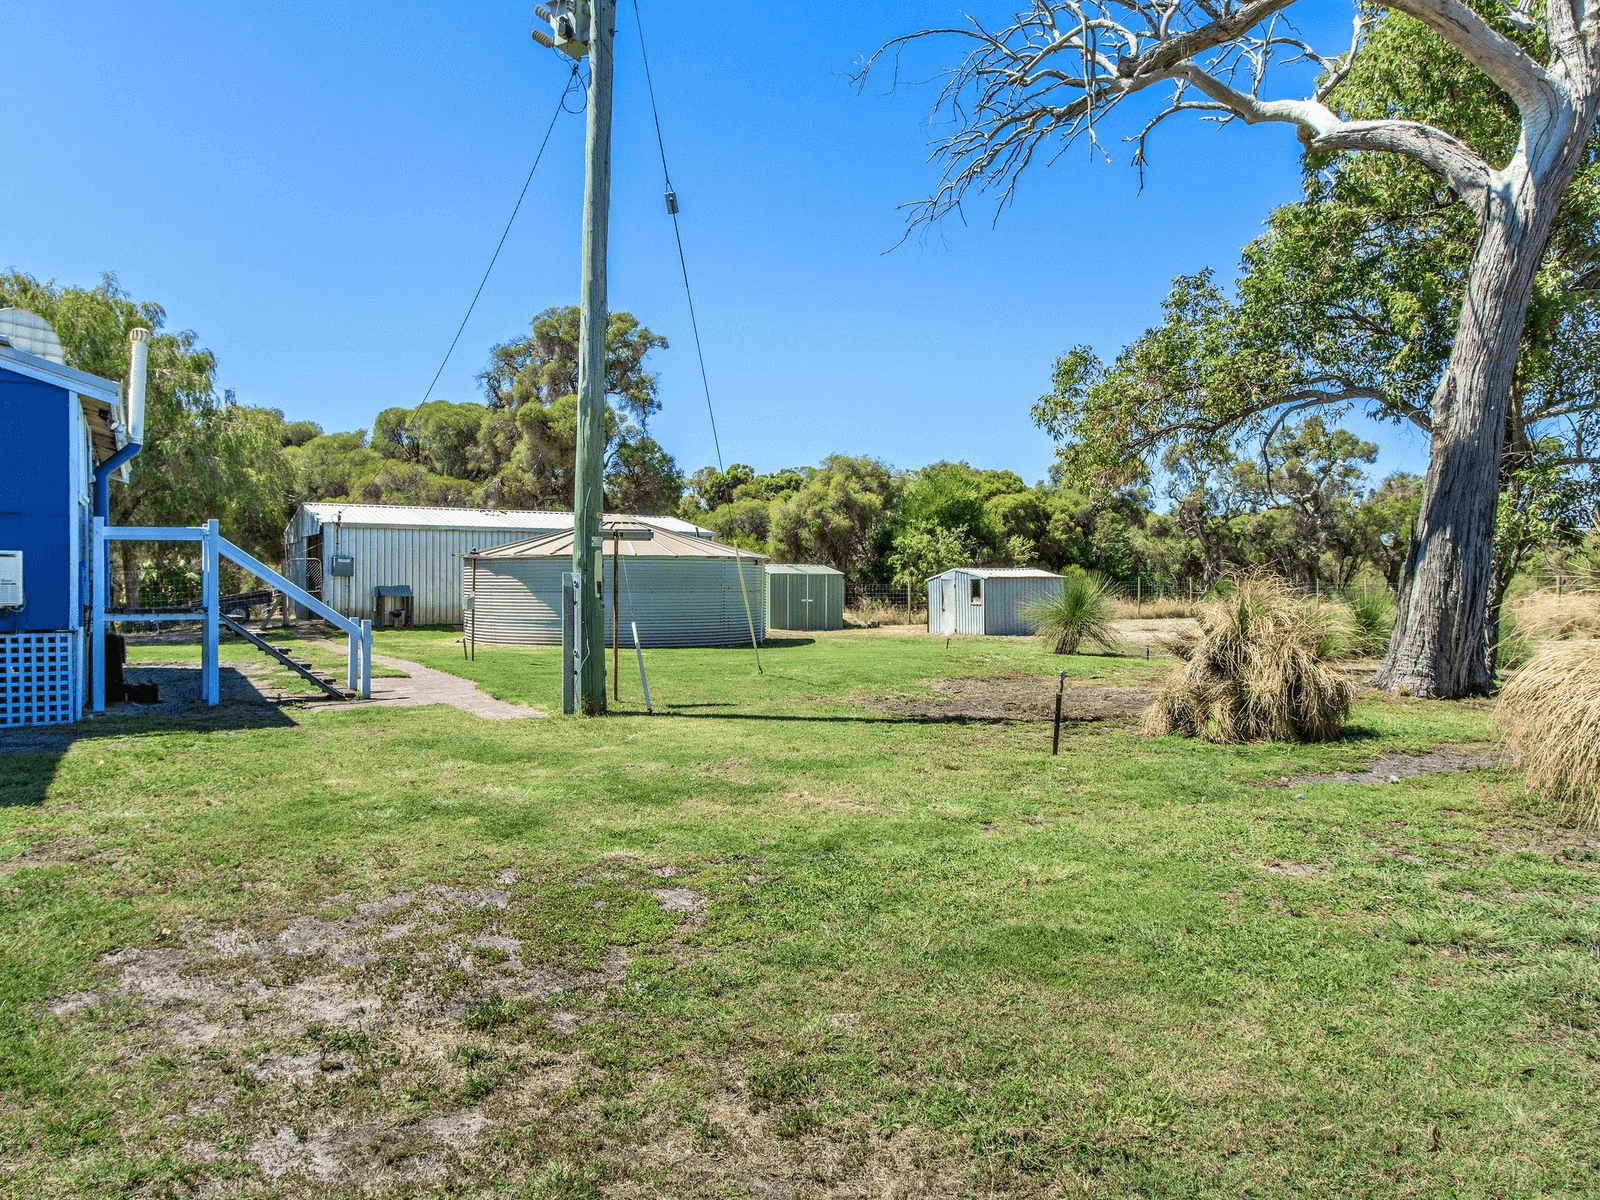 LOT 820/215 Attein Rd, WEST COOLUP, WA 6214